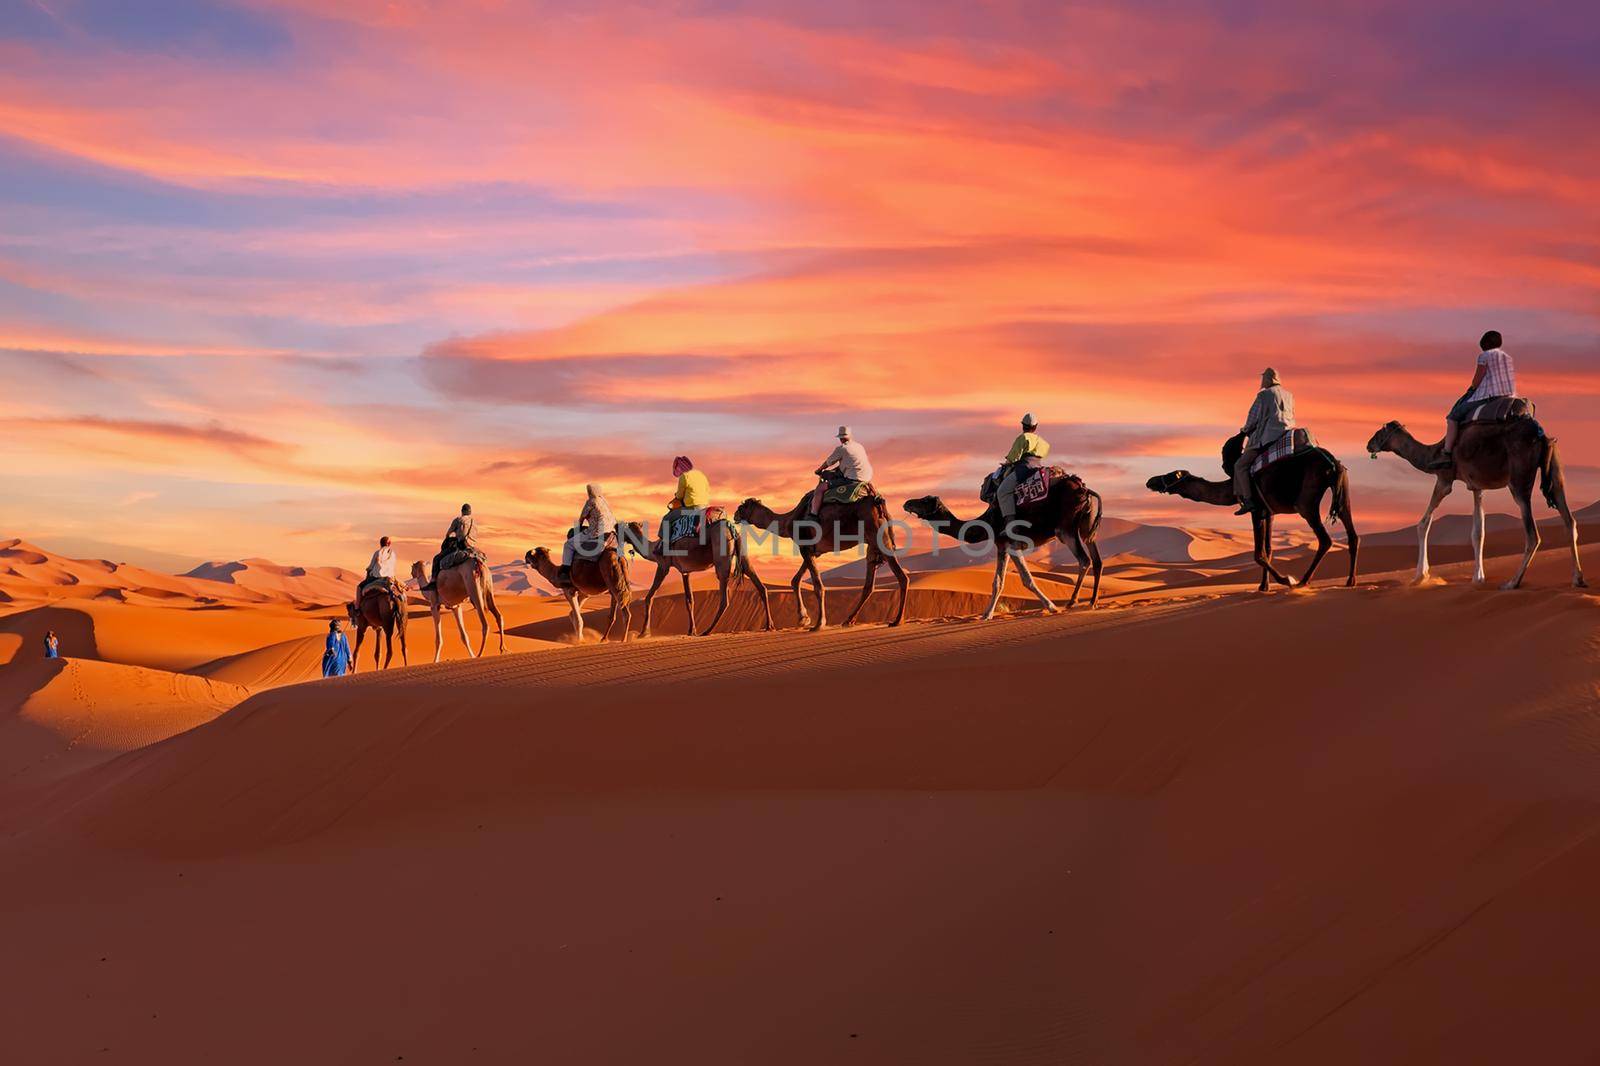 Camel caravan going through the Sahara desert in Morocco at sunset by devy